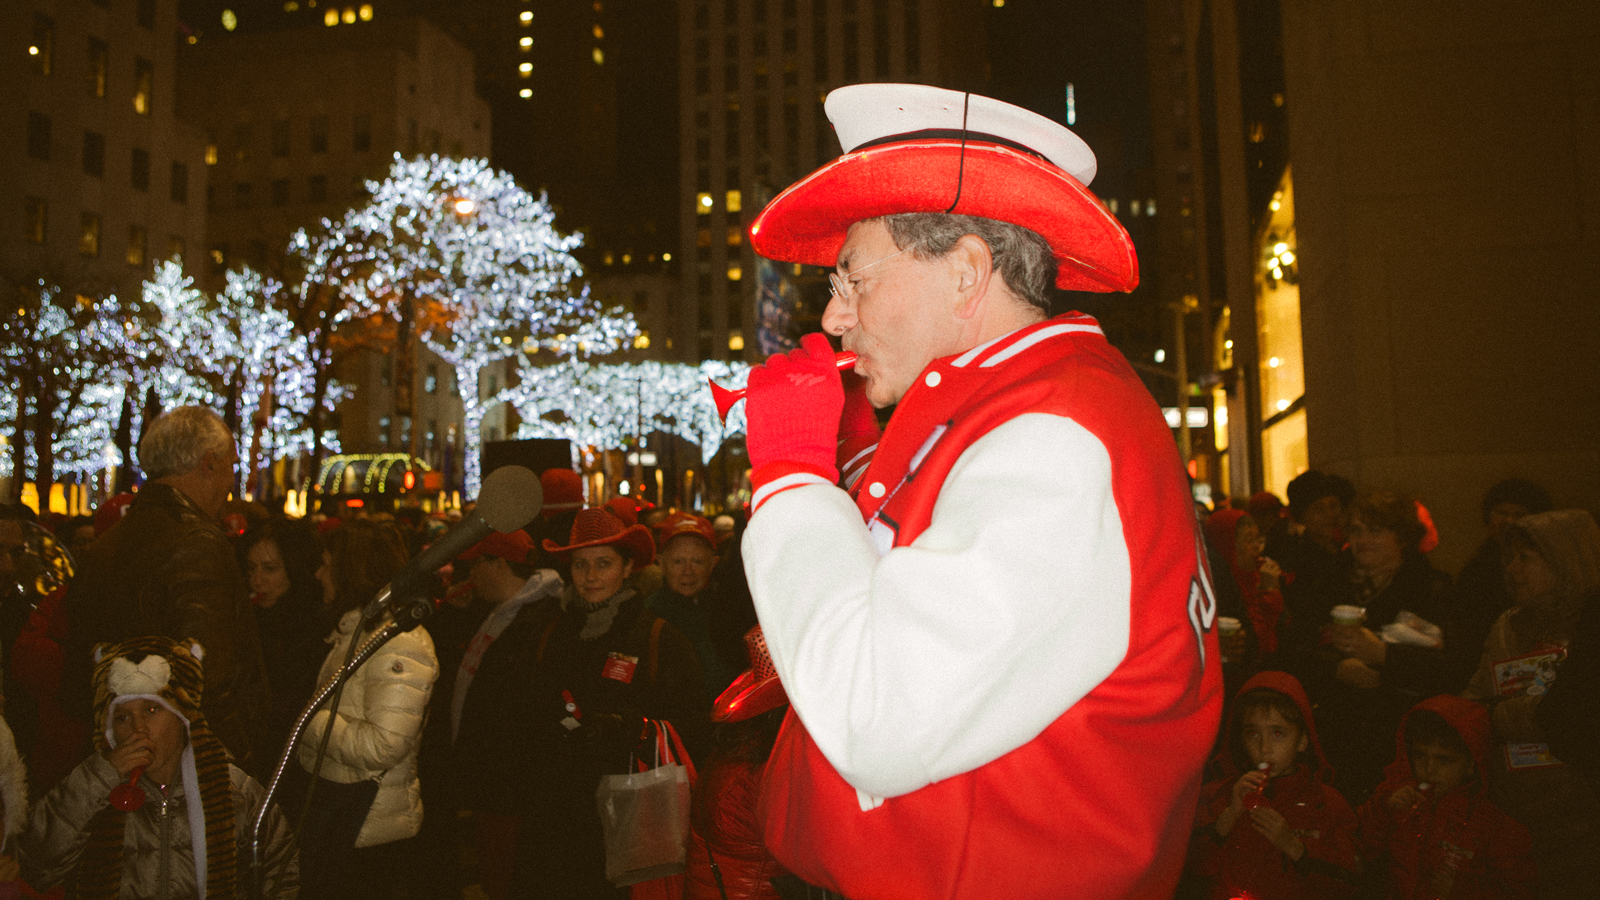 Cornell fan plays a kazoo during the Sy Katz Parade in New York City